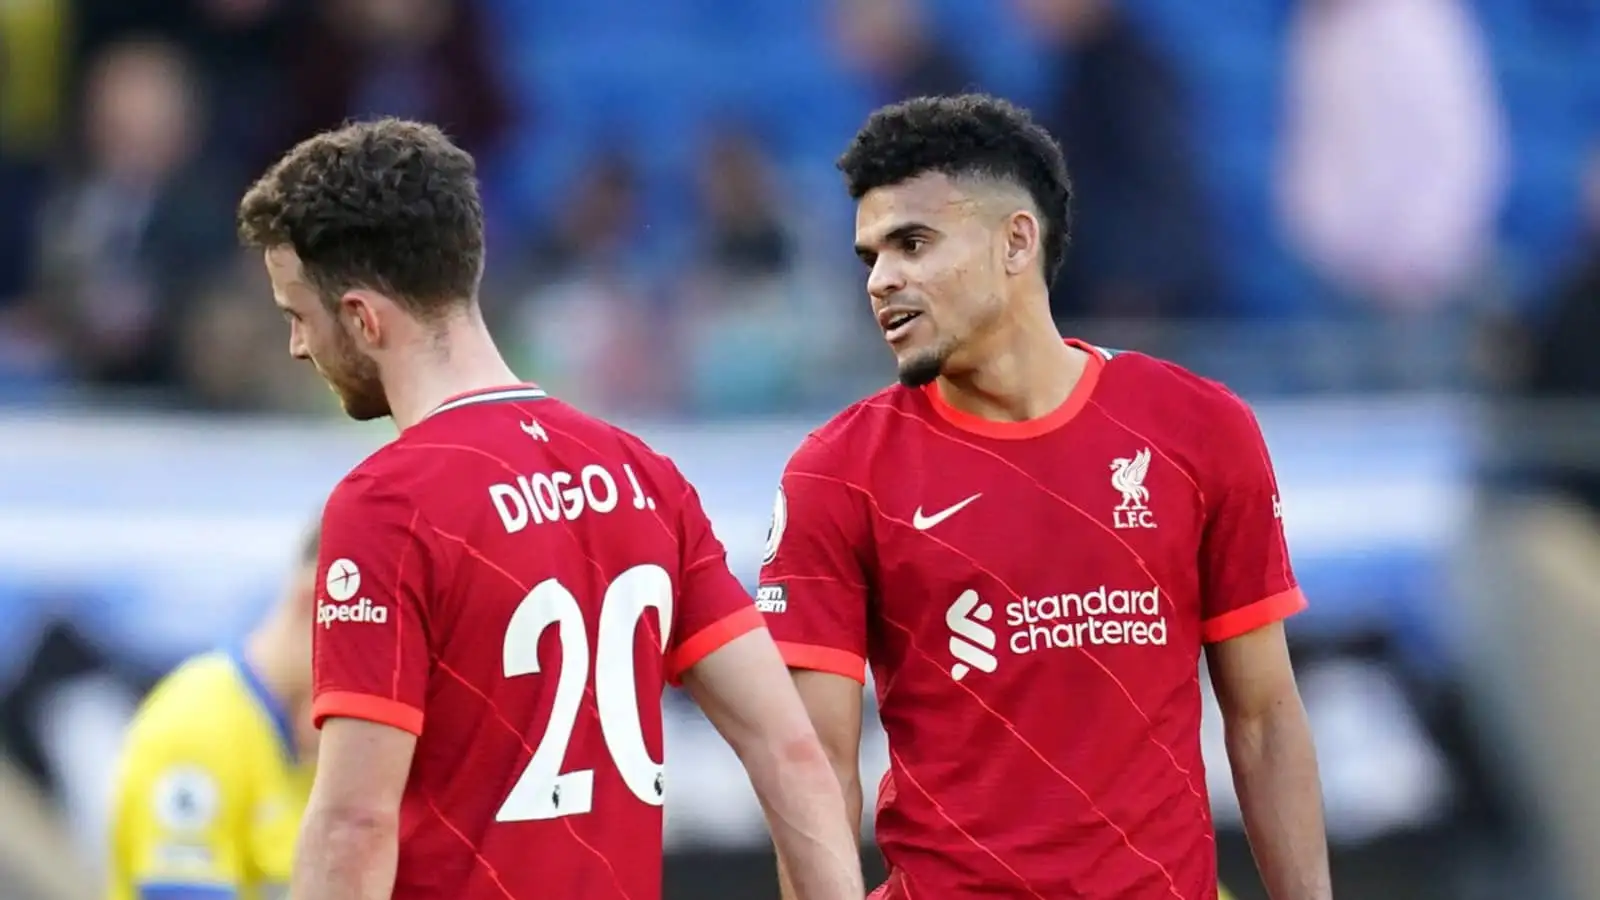 Luis Diaz and Diogo Jota of Liverpool